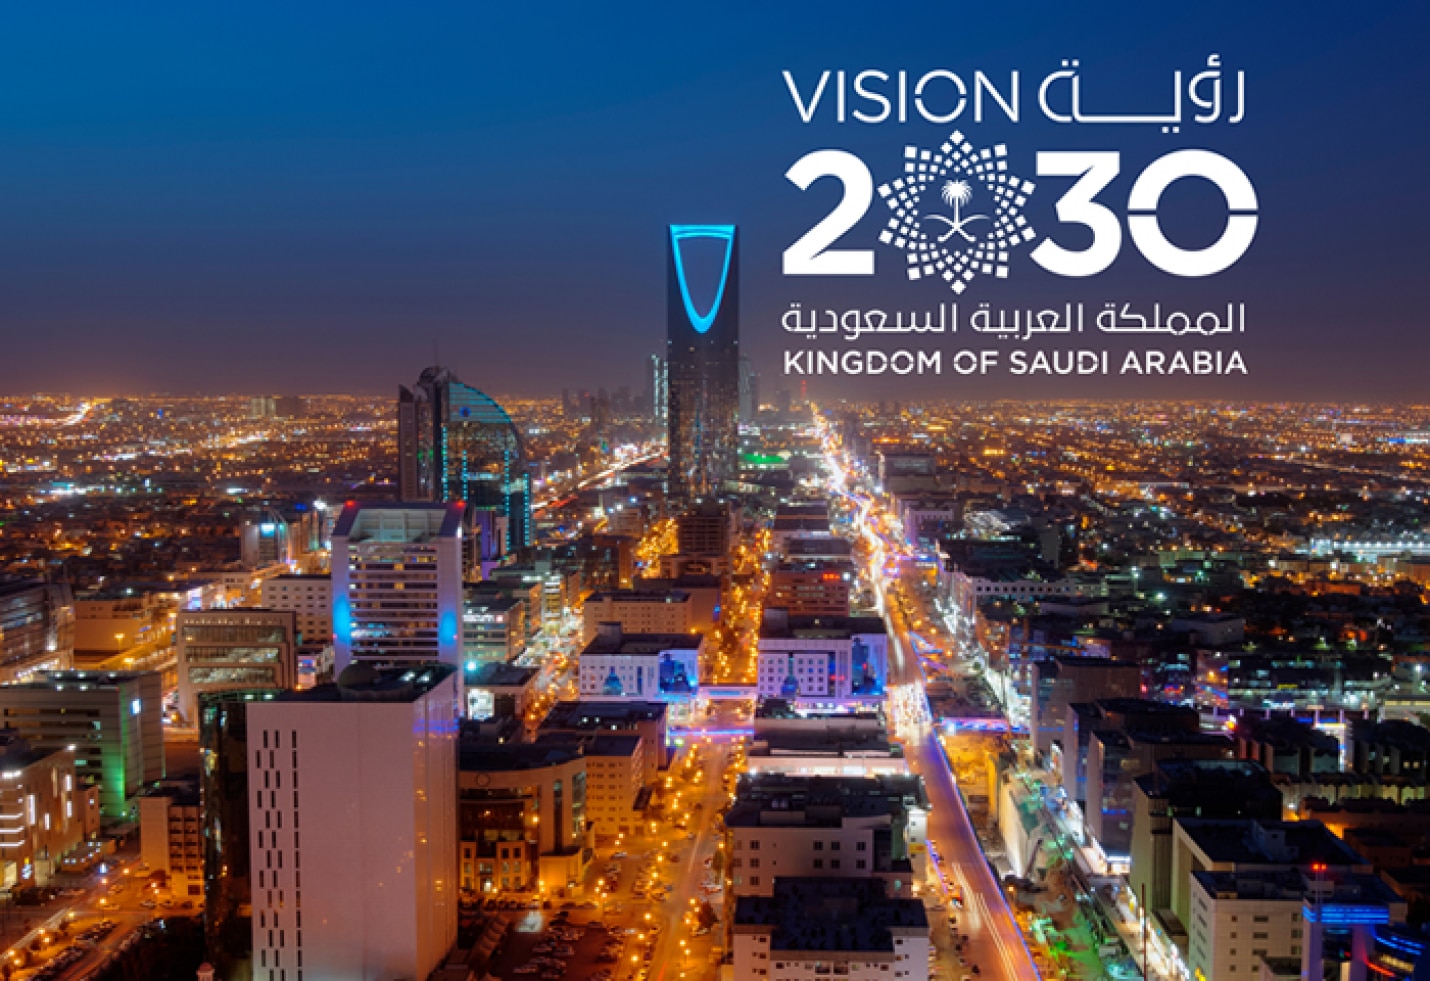 Technical and Vocational Training for Sustainable Development in Saudi Arabia and Vision 2030